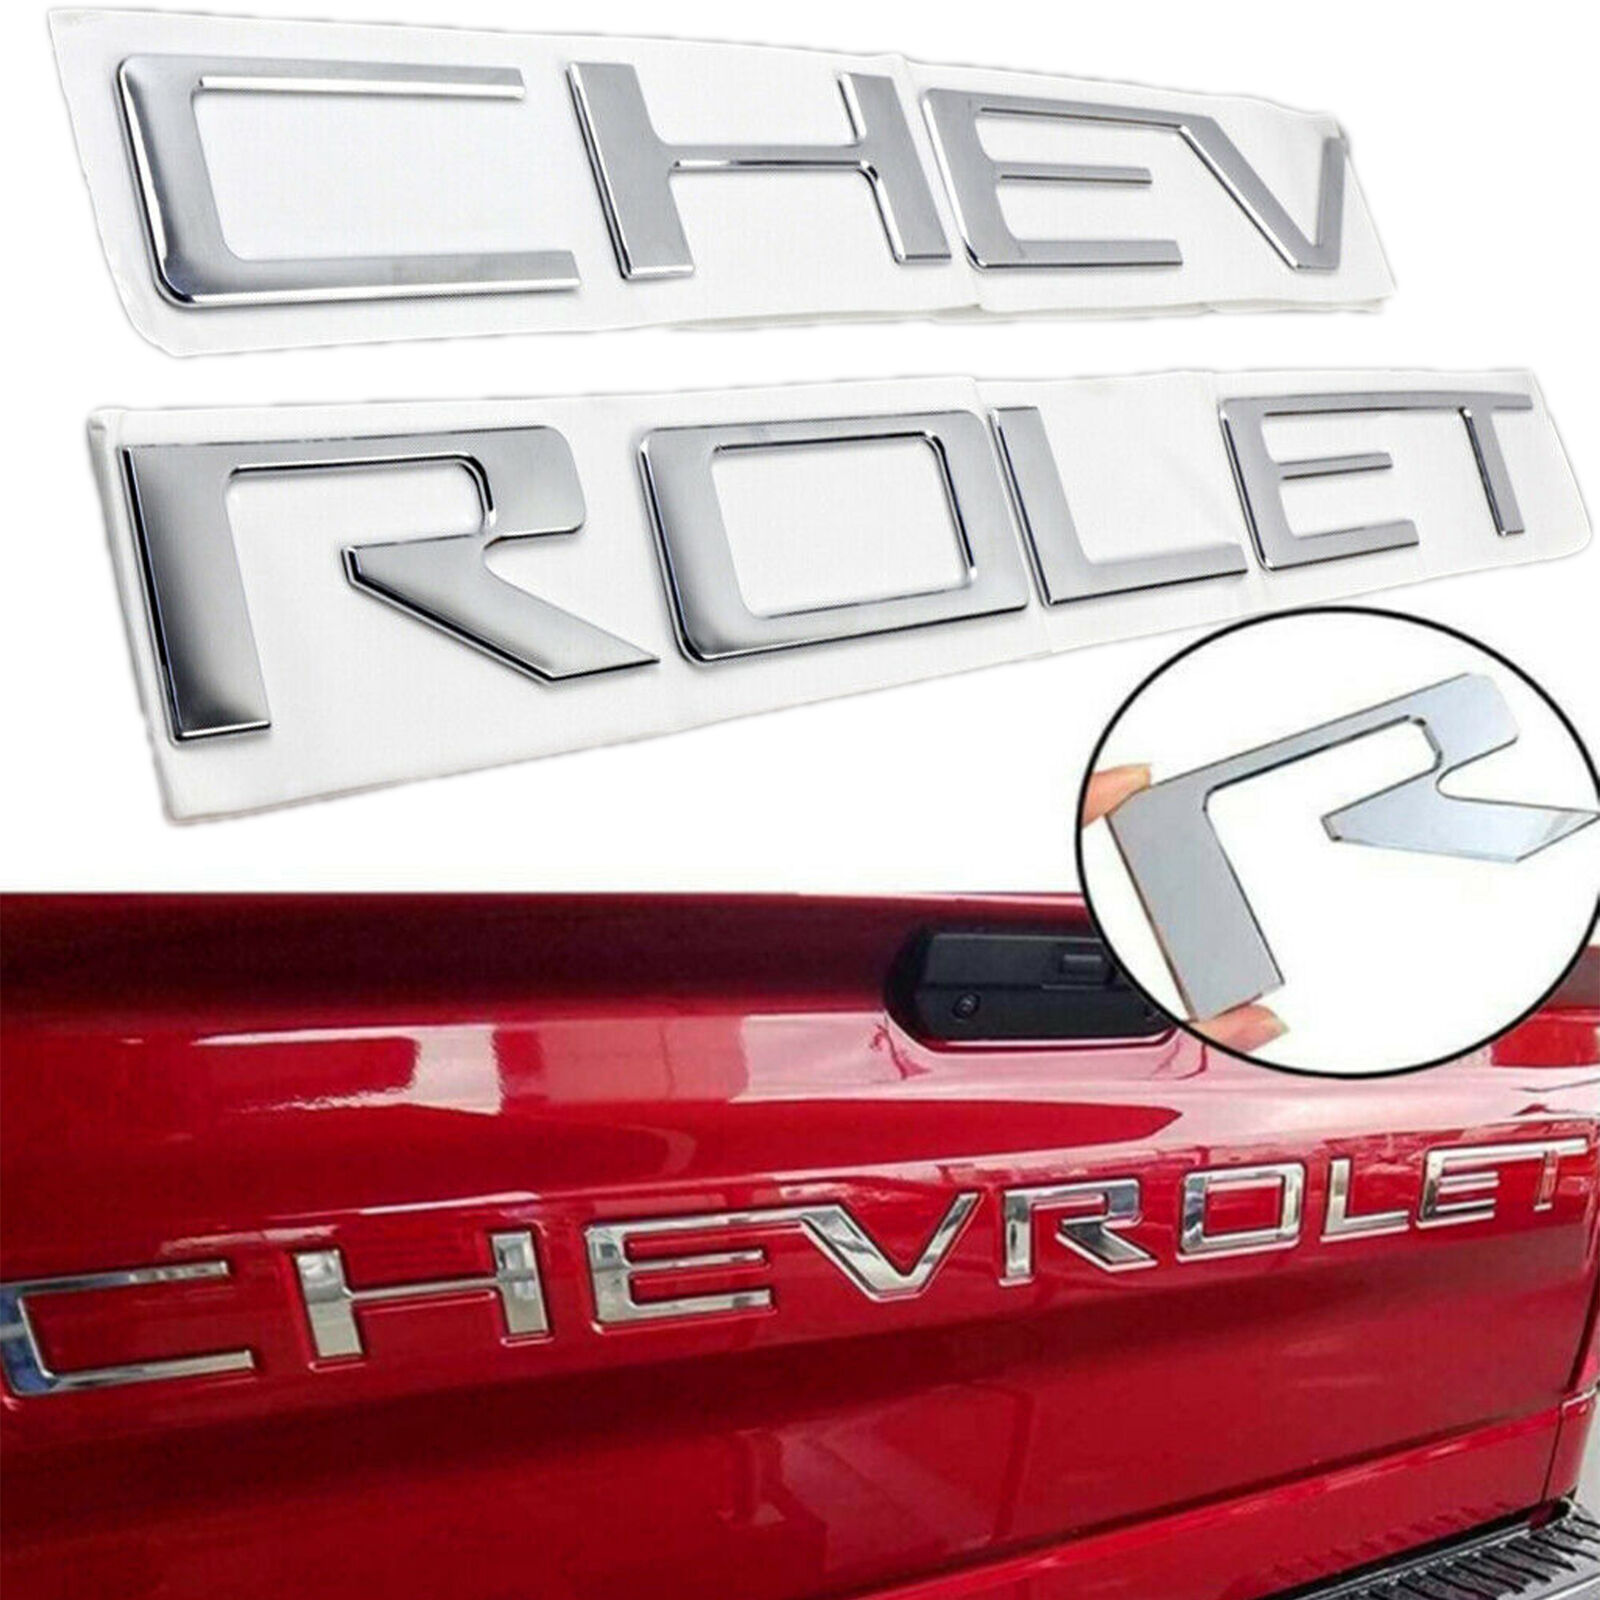 Chrome Raised Tailgate Letters Decal Fit For Chevy Chevrolet Silverado 2019-2021